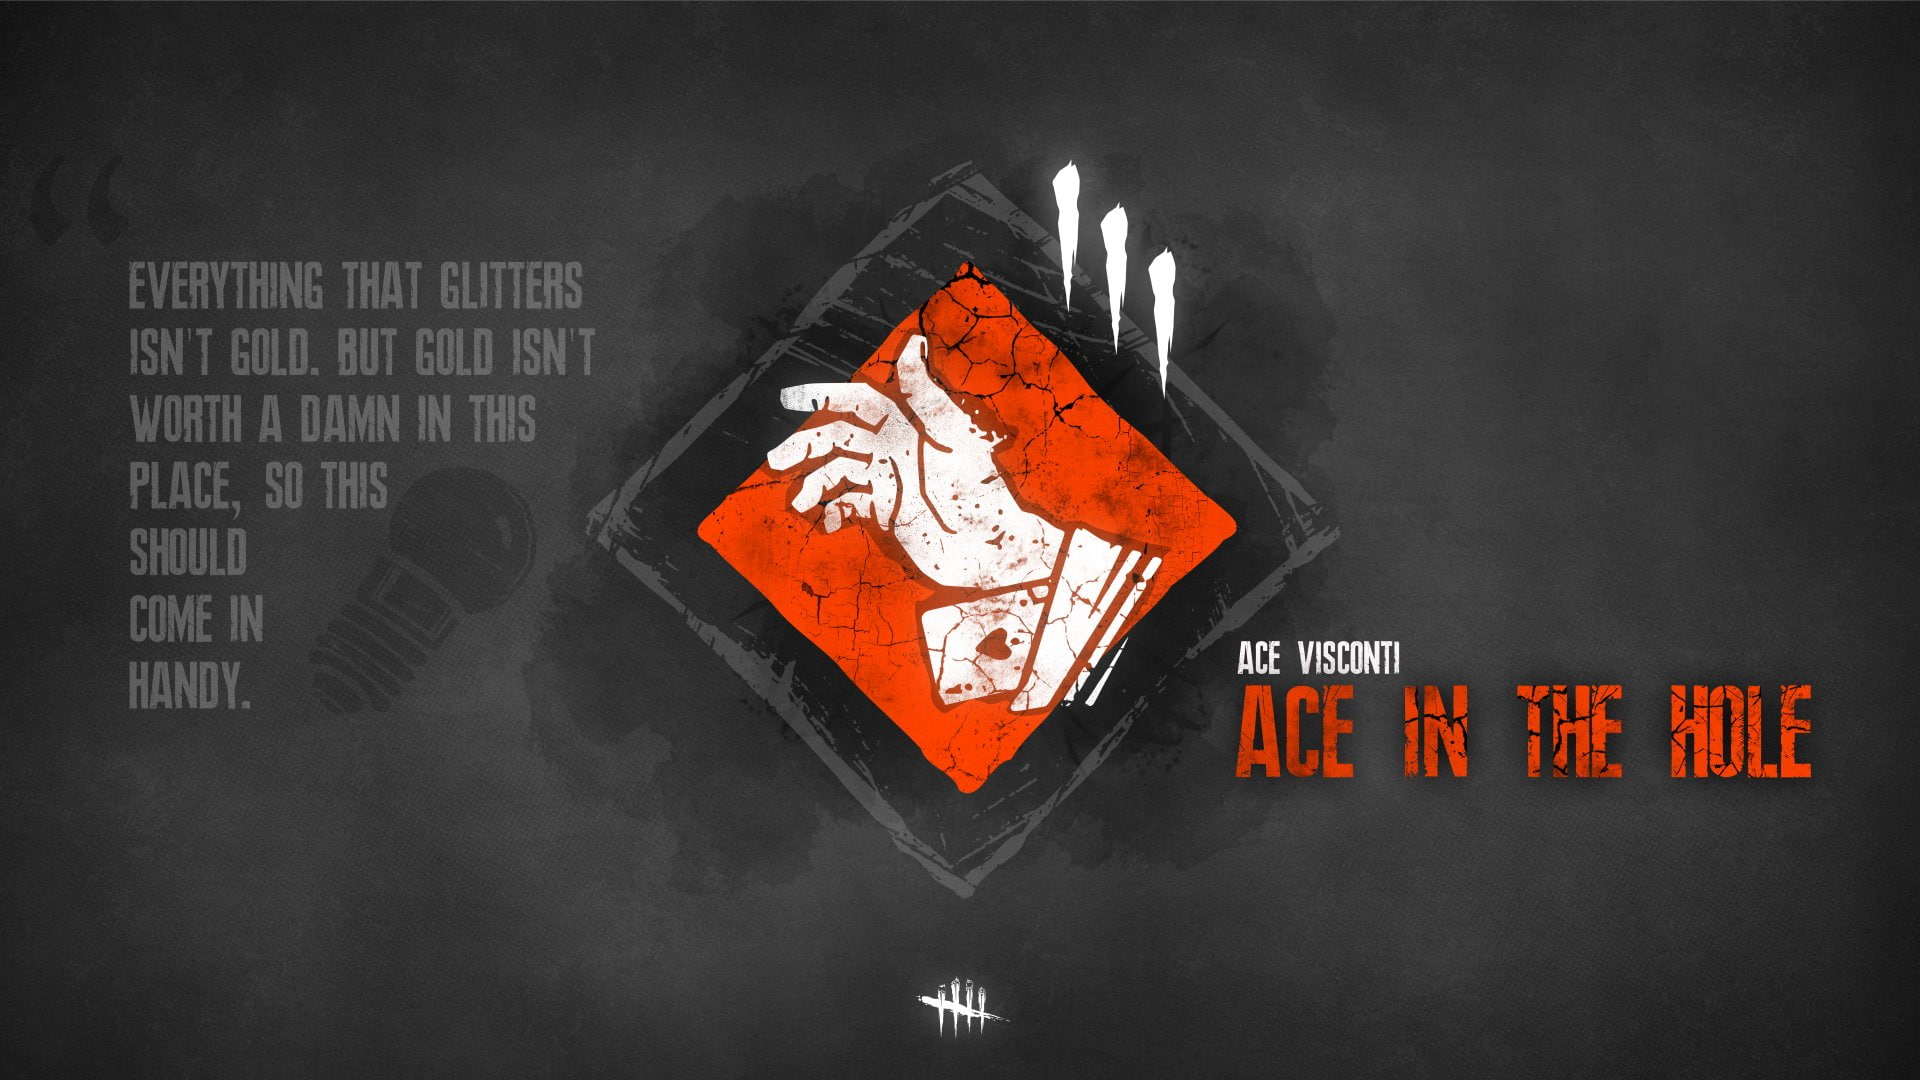 Video Game, Ace Visconti (Dead by Daylight), Ace in the hole (Dead by Daylight)